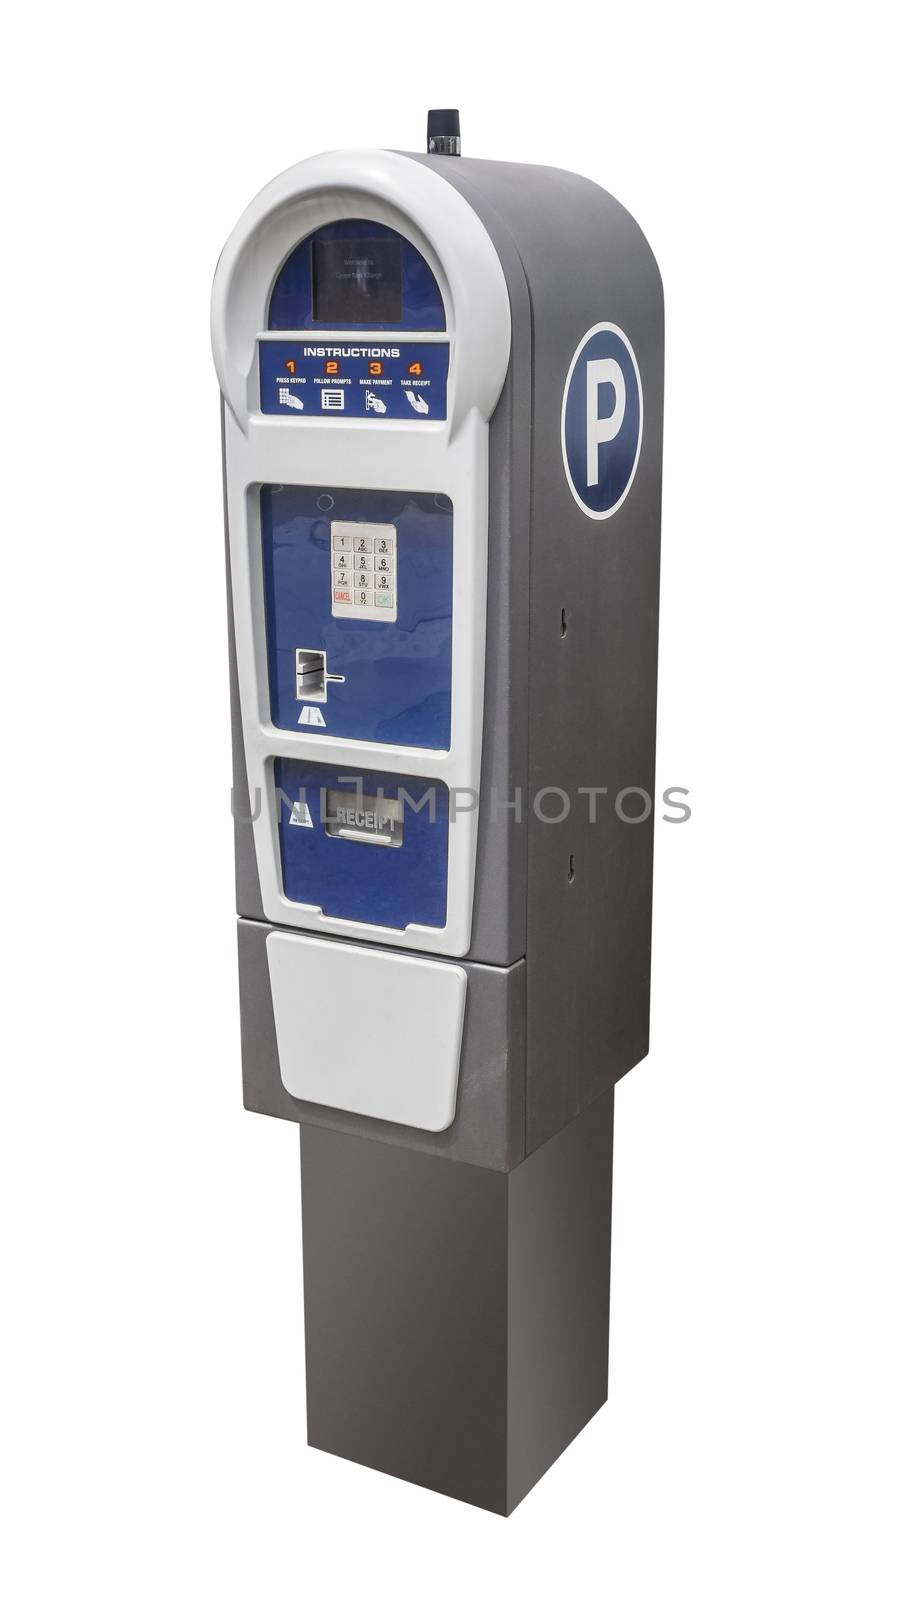 Parking meter by f/2sumicron